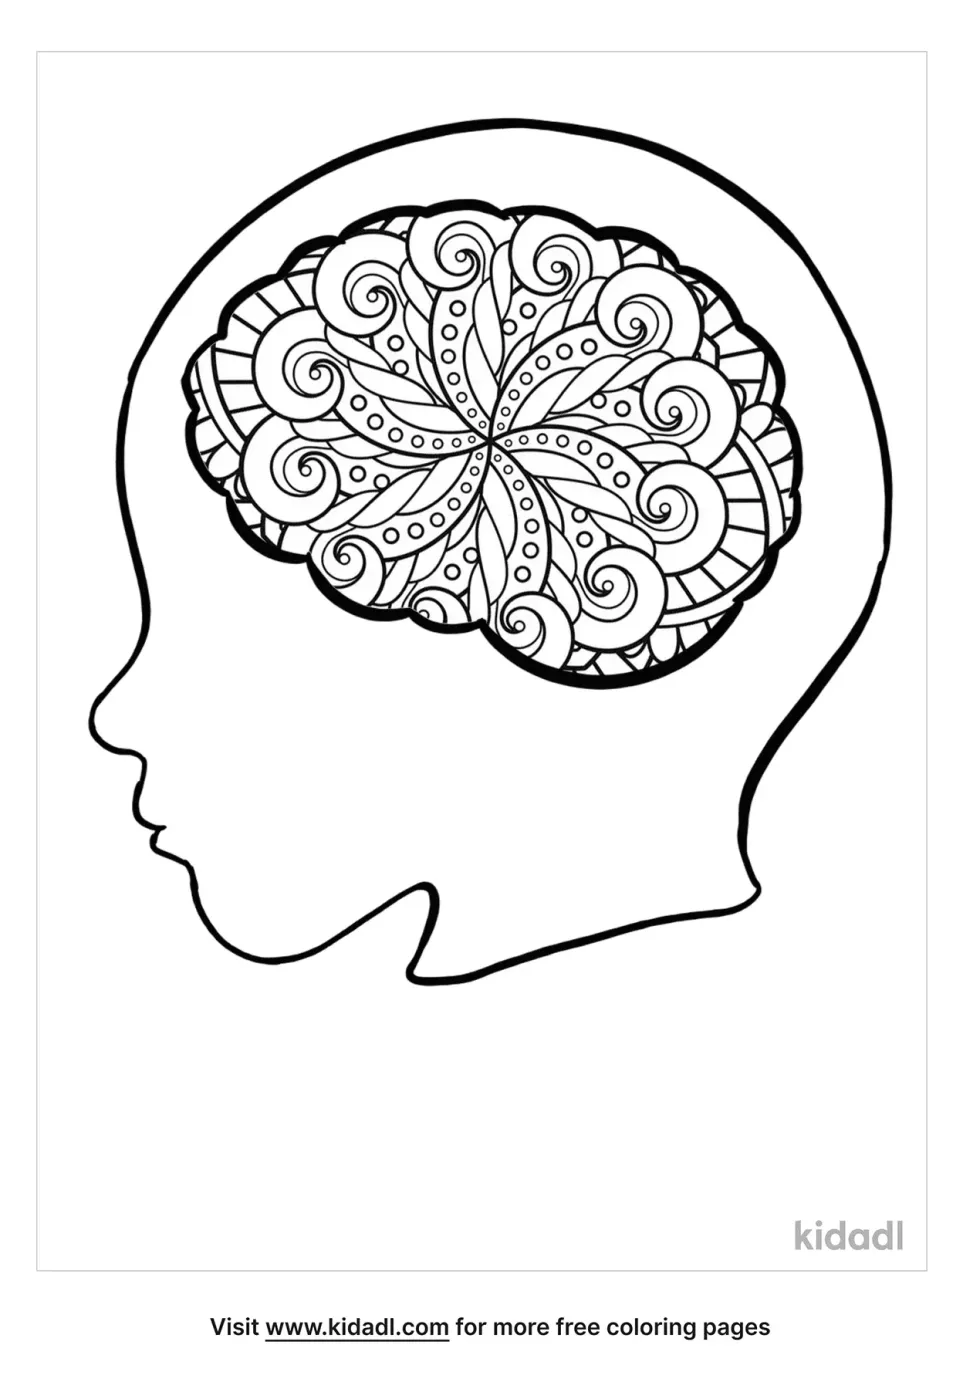 Concussion In Kids Coloring Page